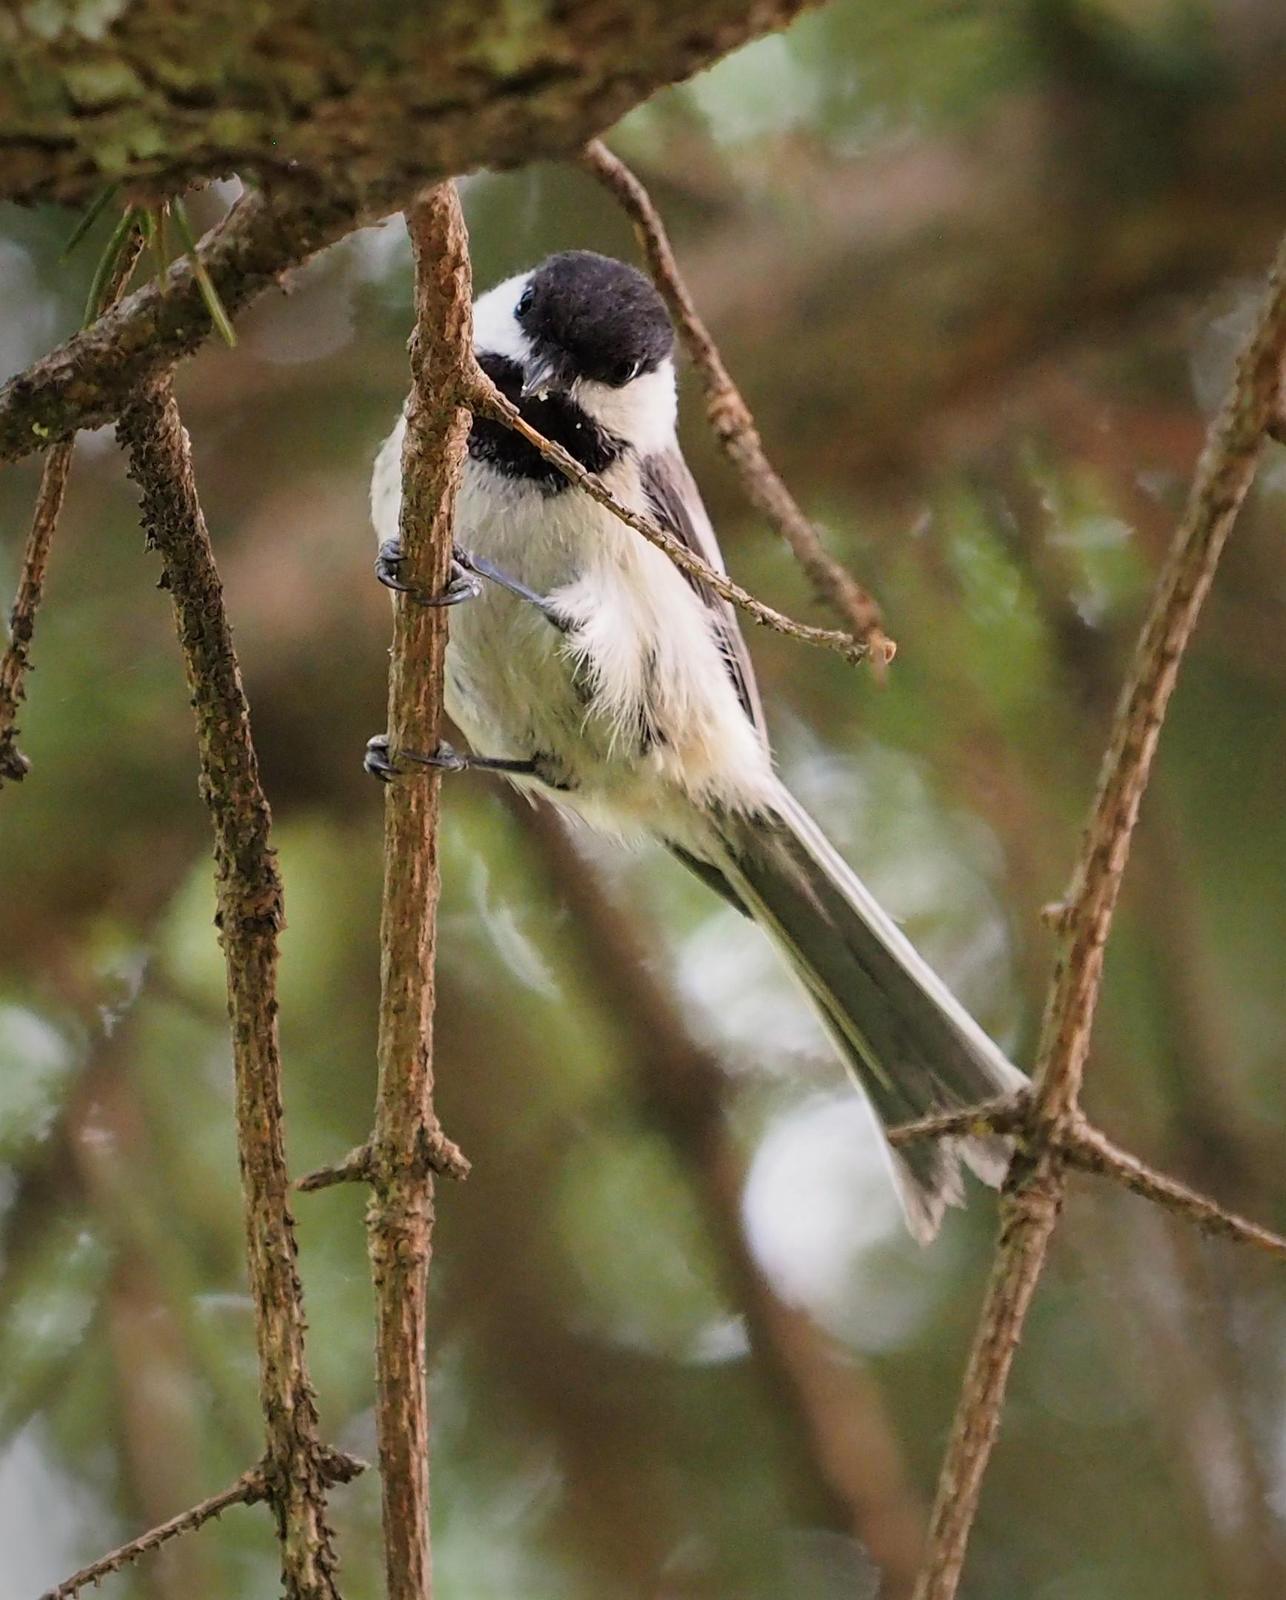 Black-capped Chickadee Photo by Colin Hill